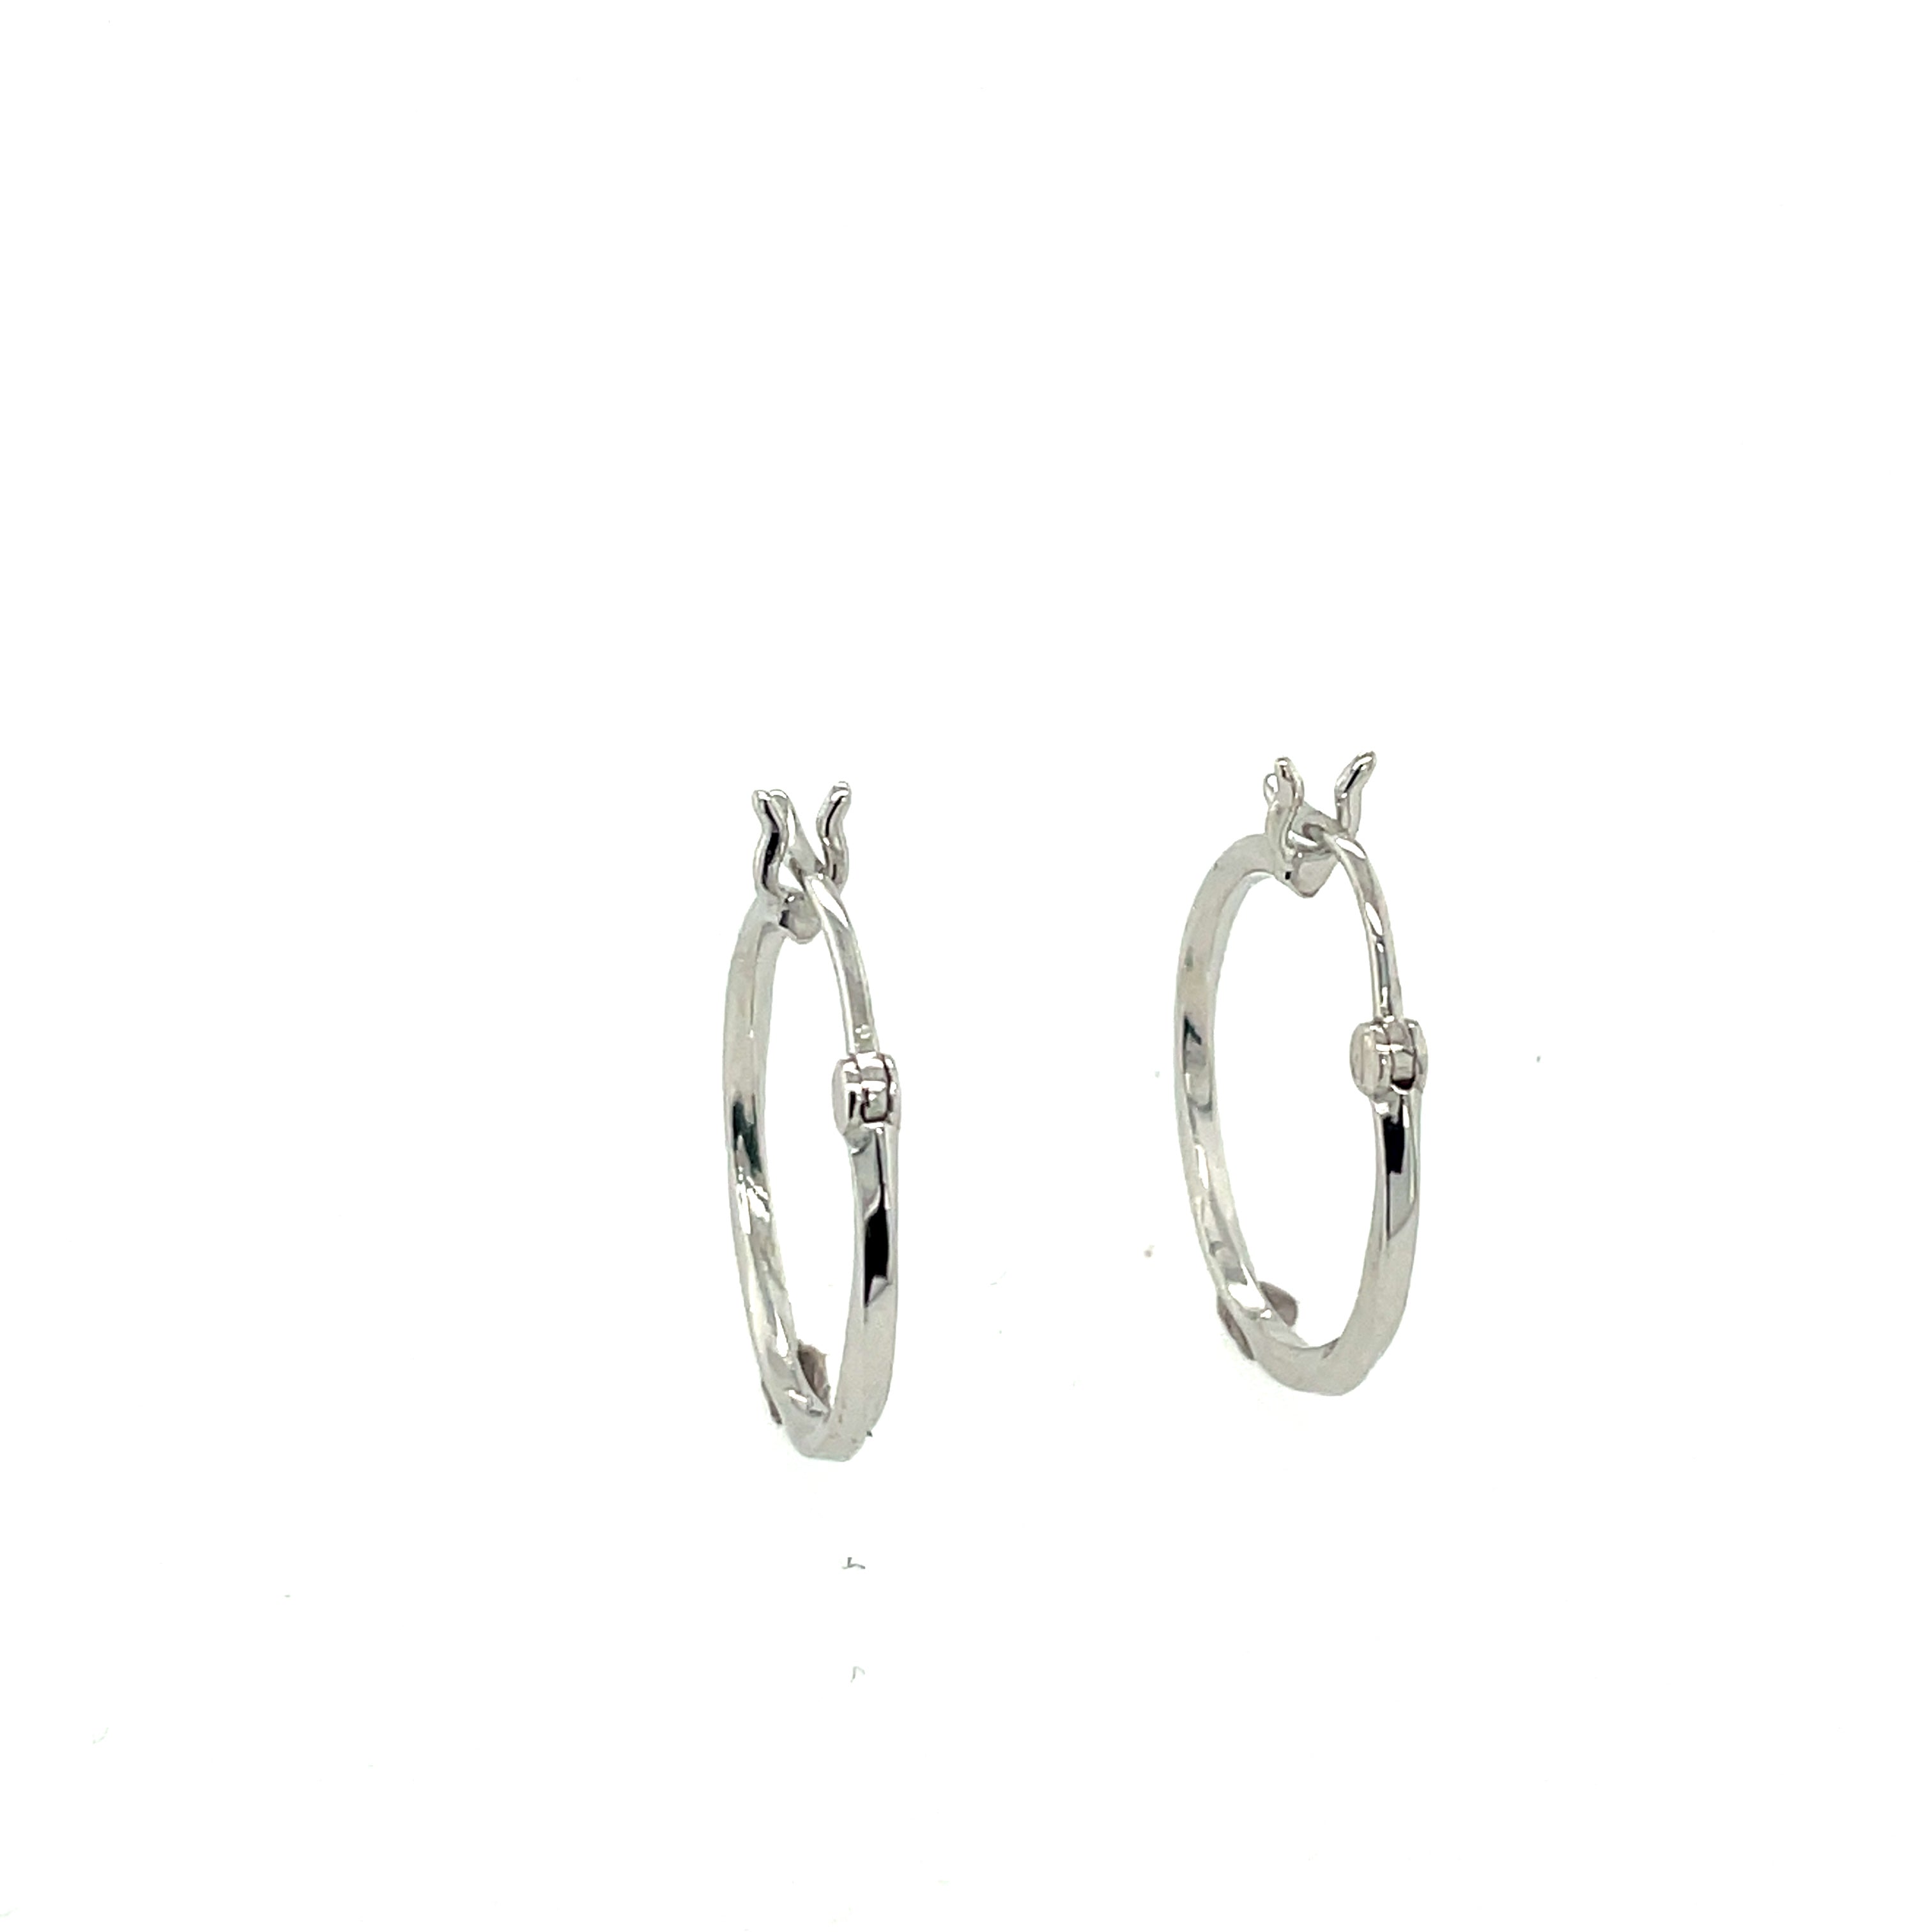 Silver Hoop Earrings - MJ019 - Hallmark Jewellers Formby & The Jewellers Bench Widnes